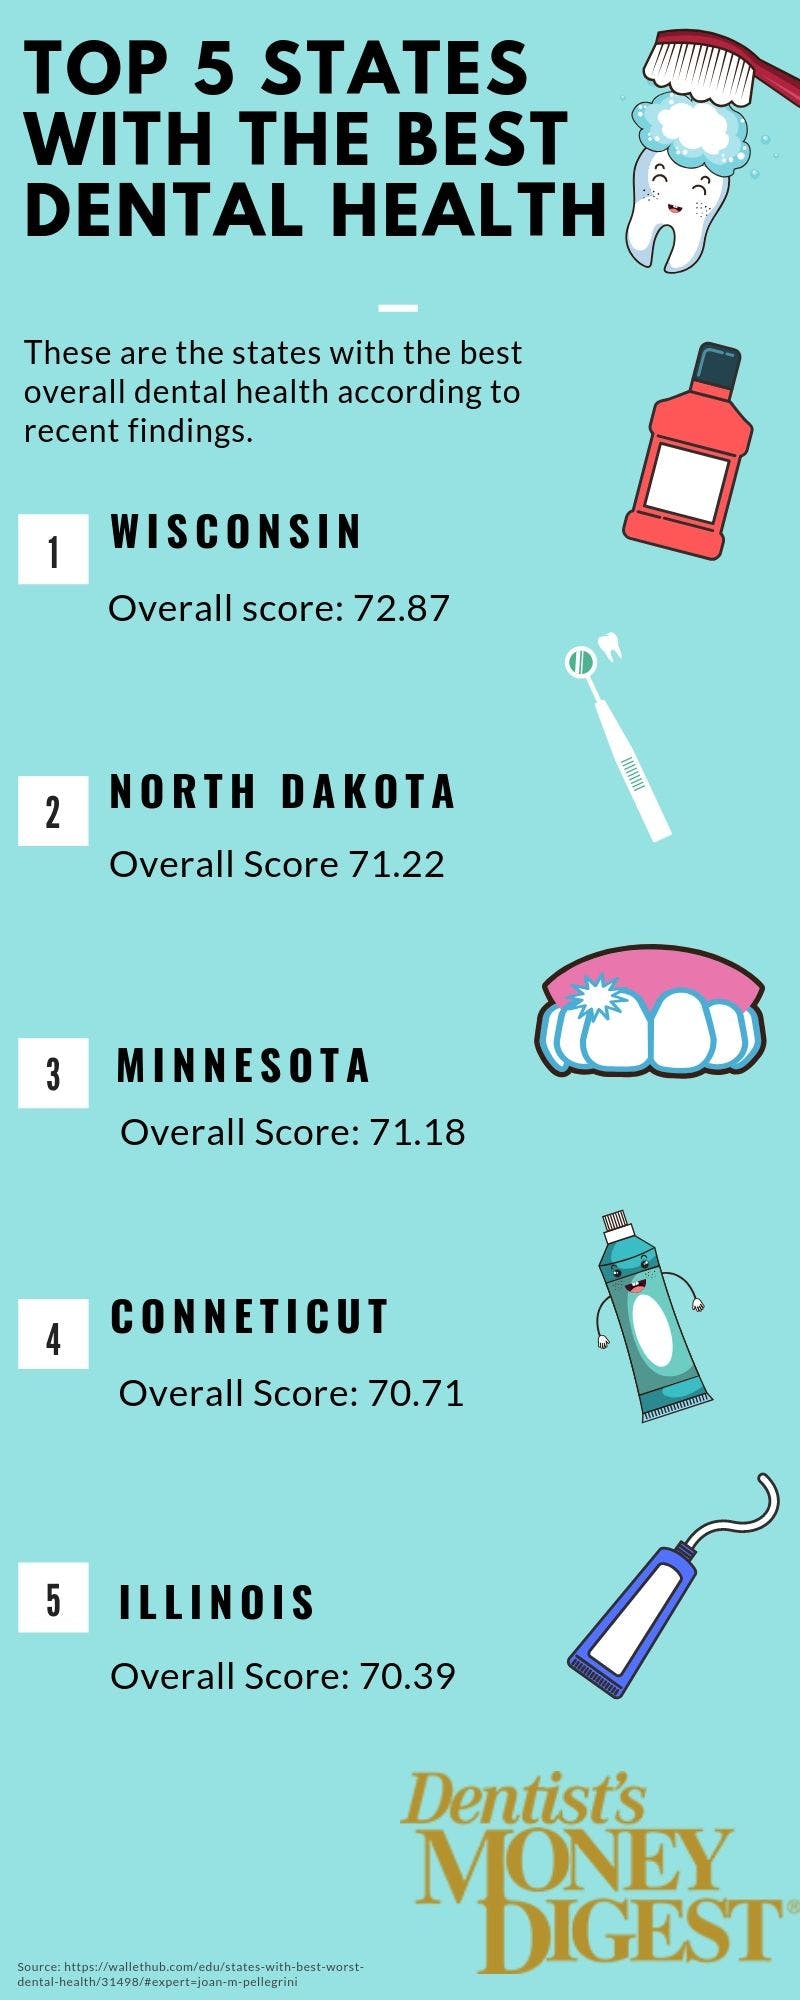 States With the Best Dental Health in 2019